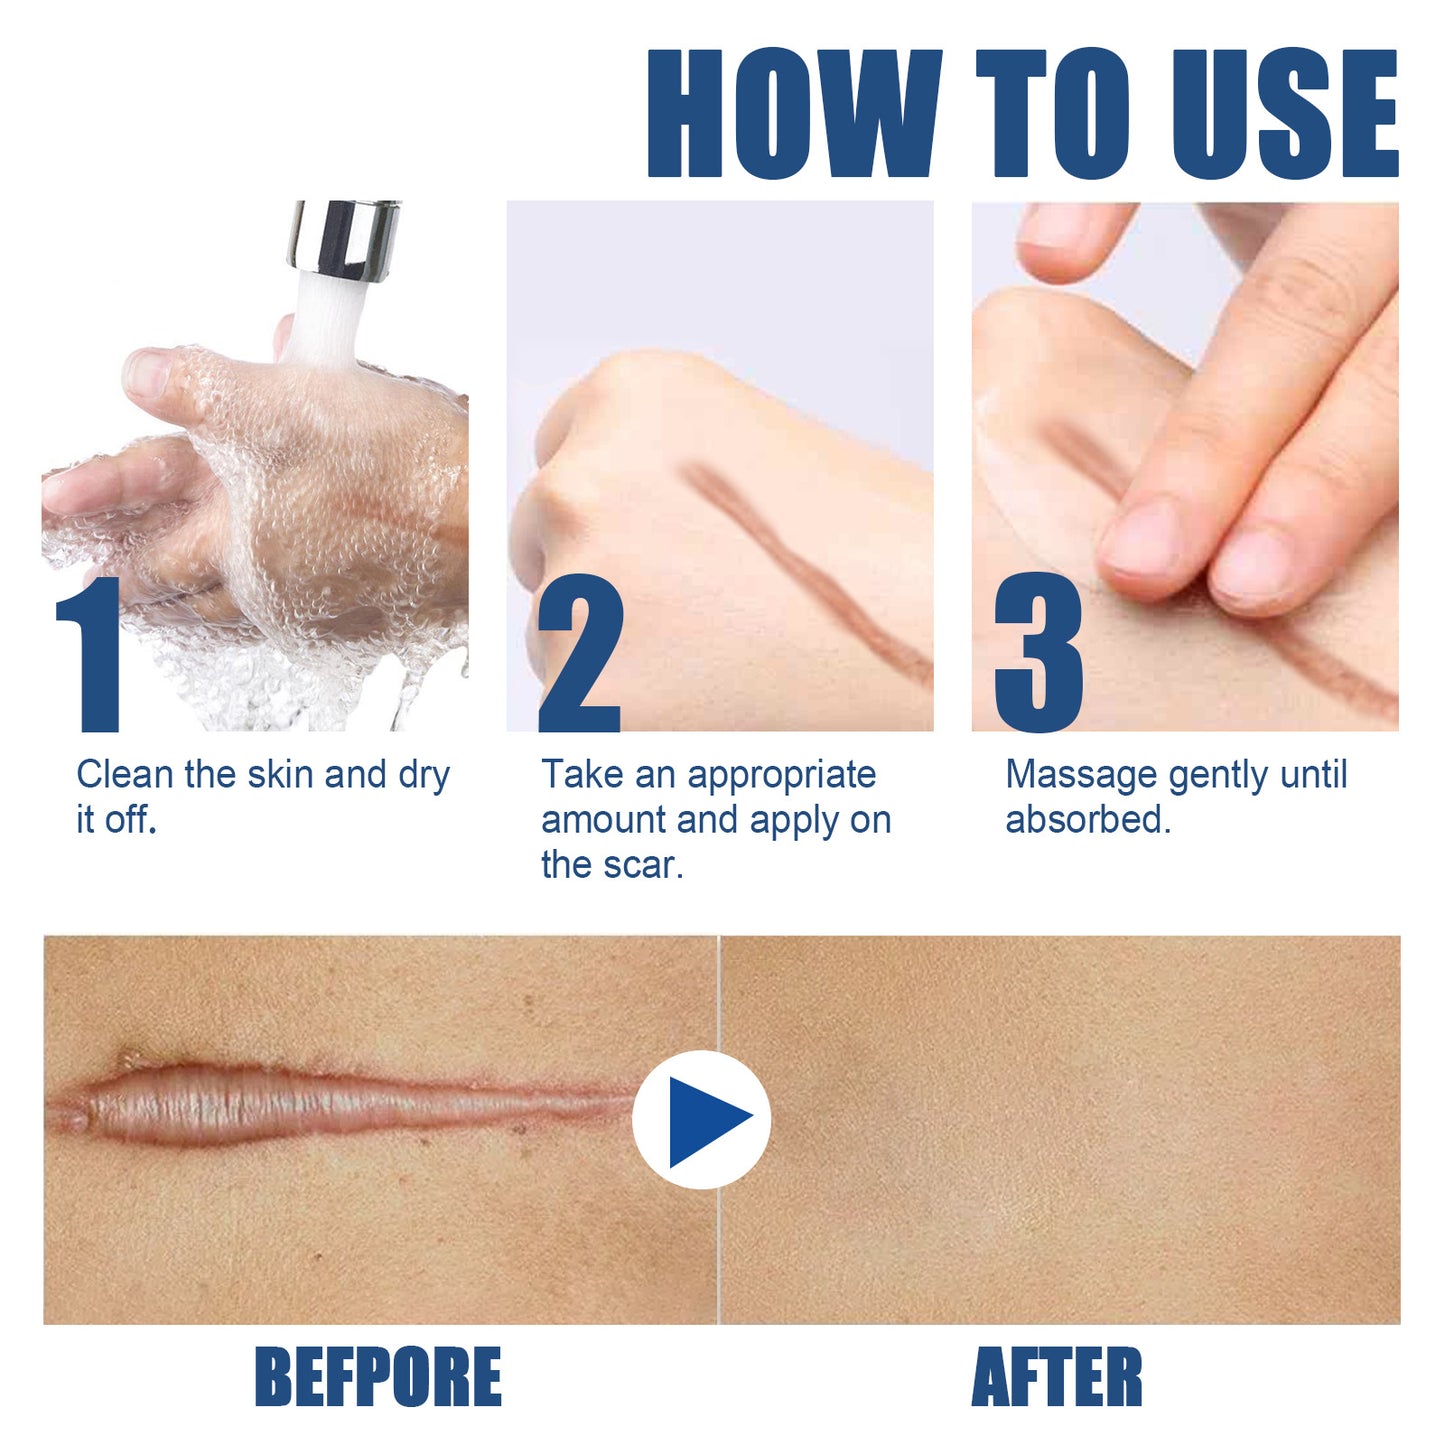 EELHOE Scar Removal Cream For Face and Body, Old and New Cuts Scars